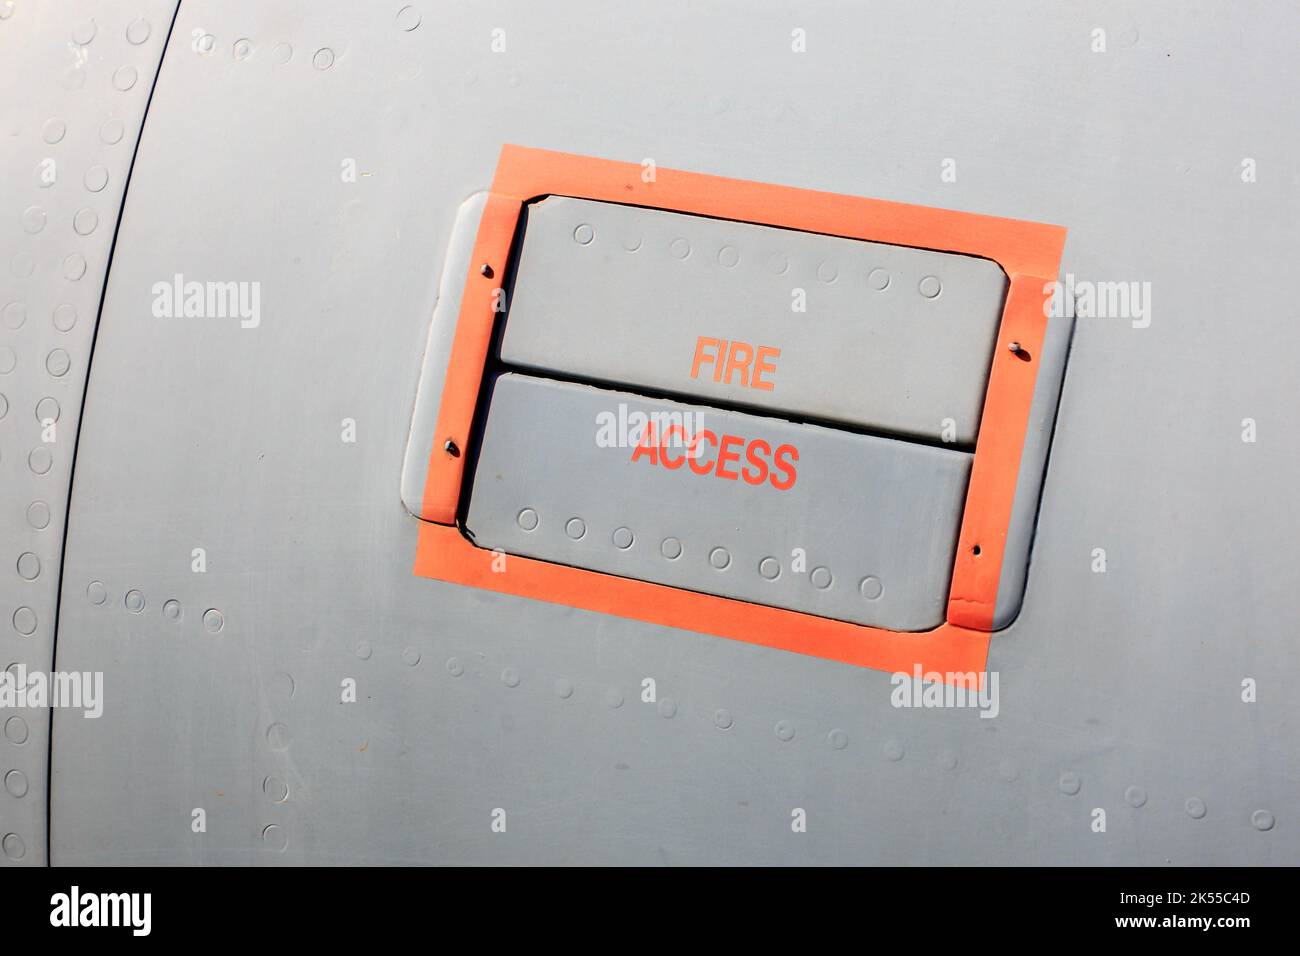 Fire access sign and panel on the side of  an jet plane Stock Photo